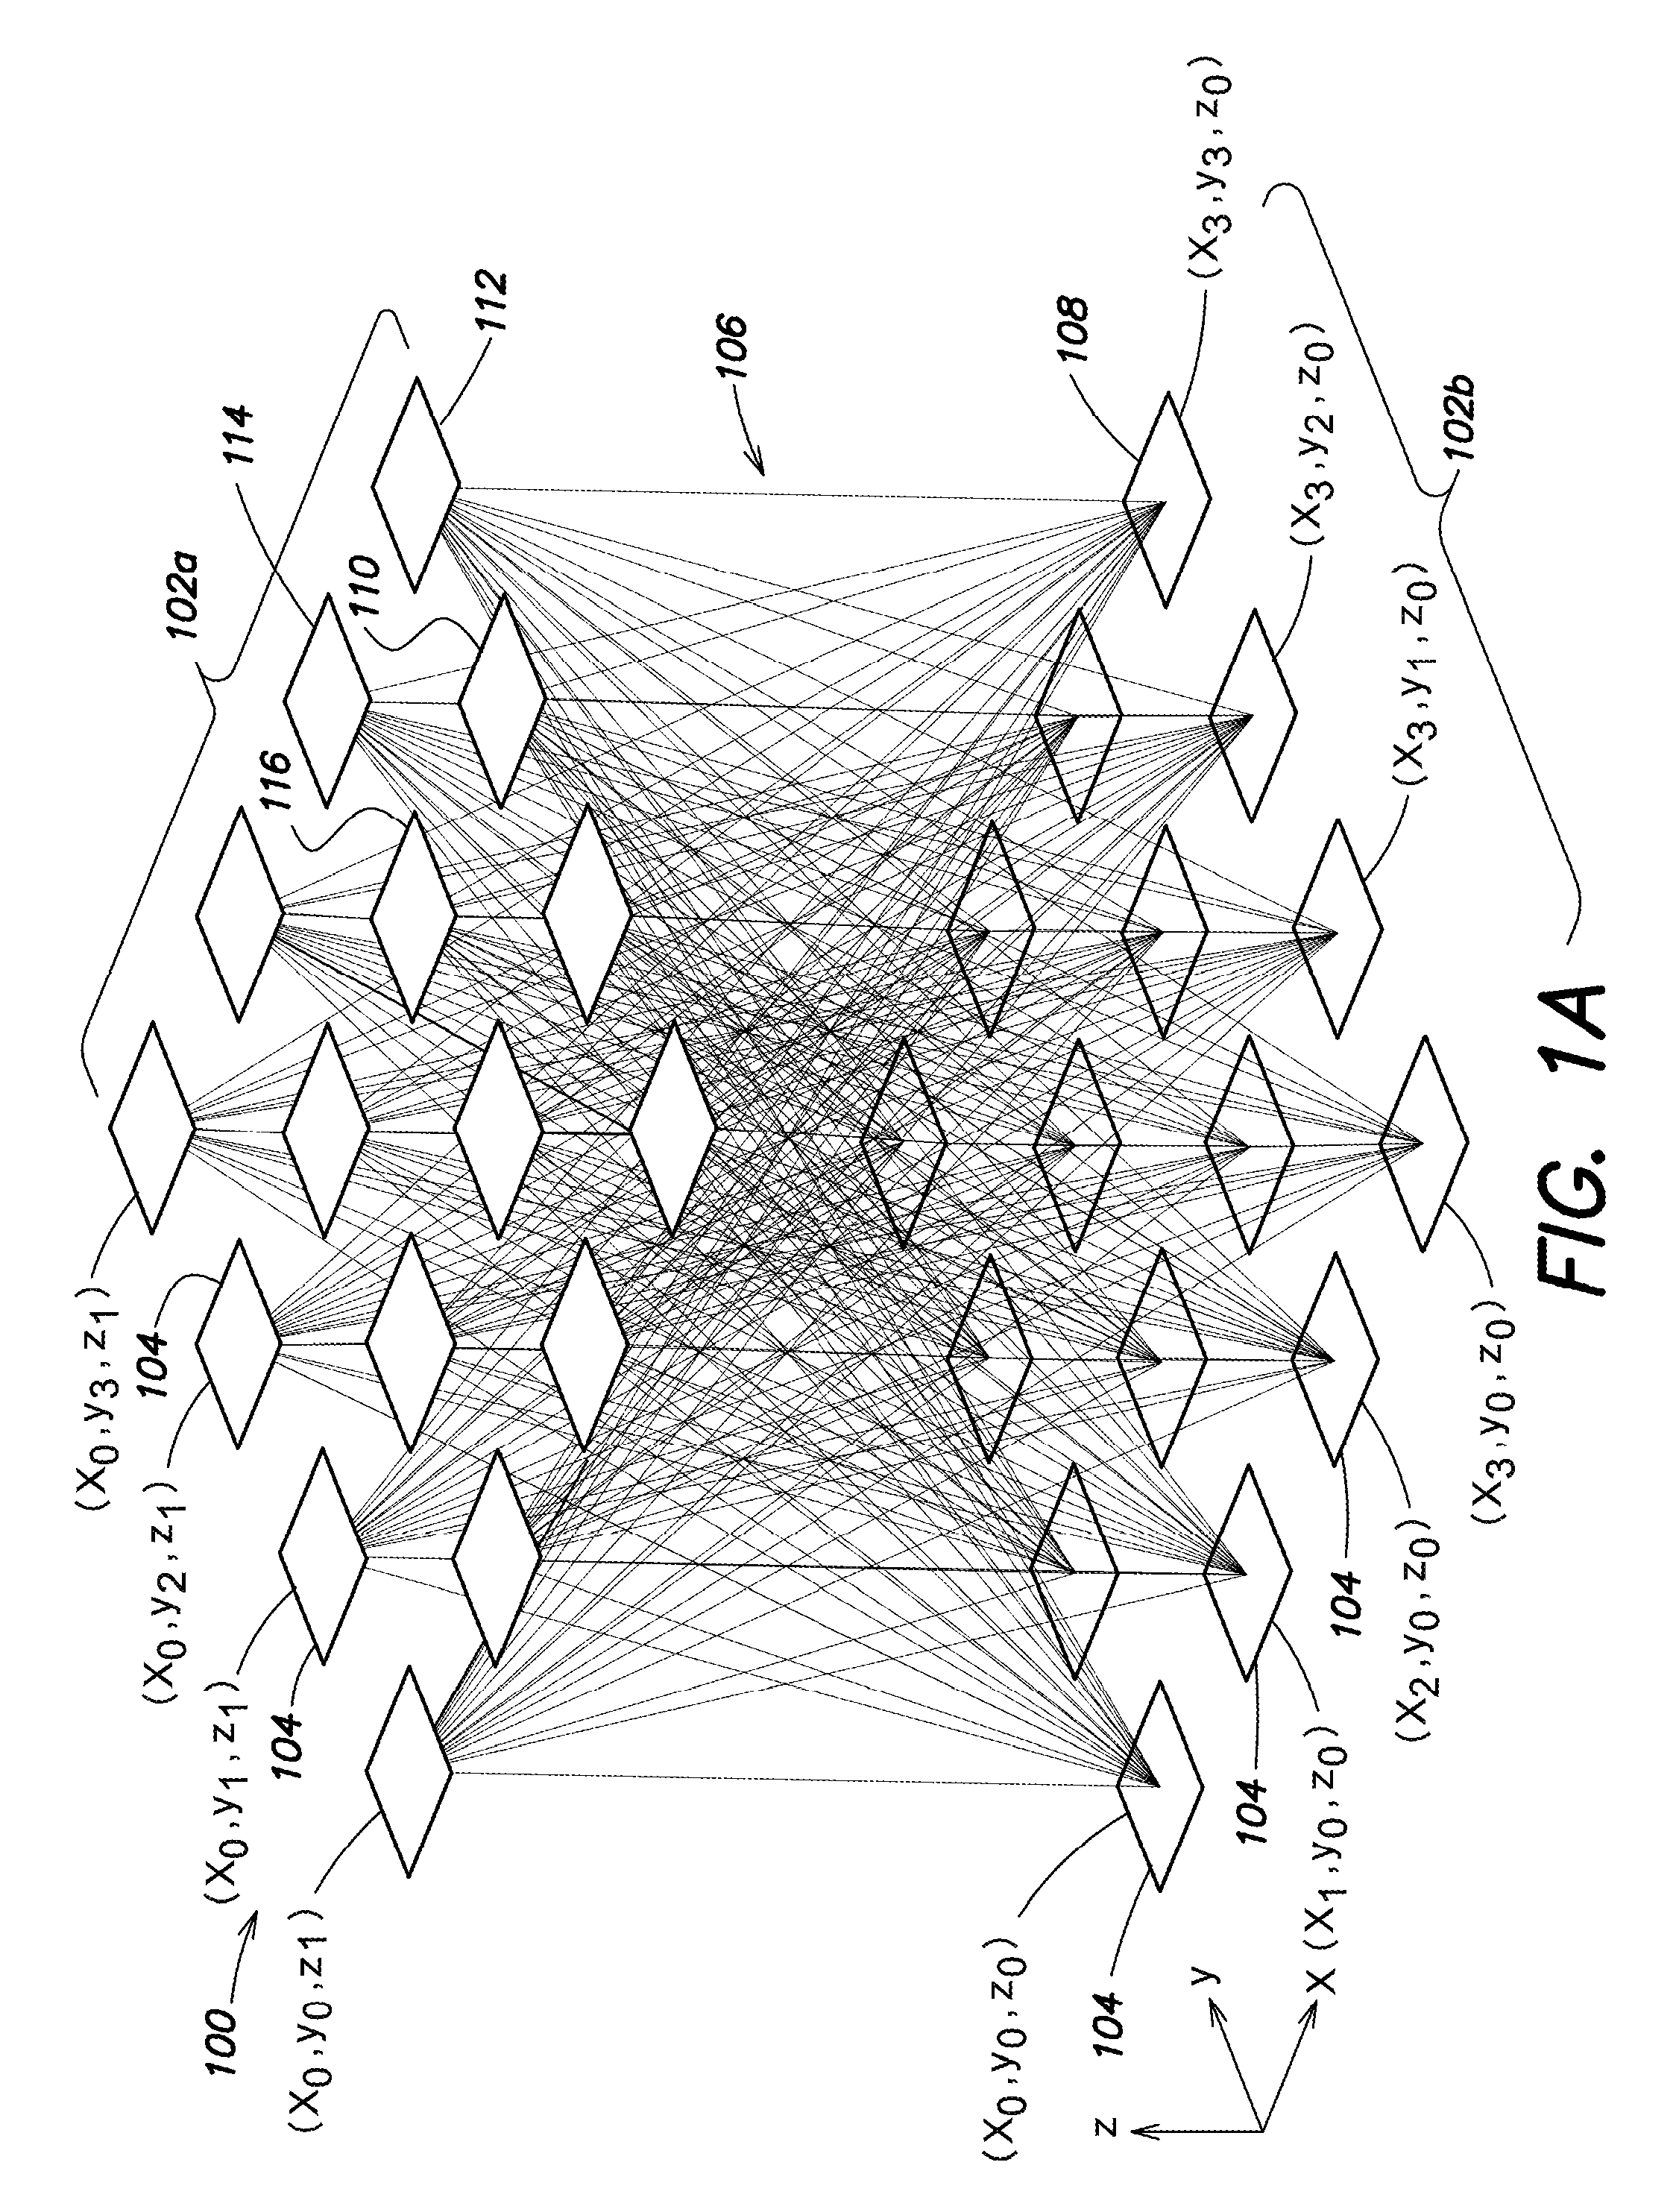 Transmissive imaging and related apparatus and methods